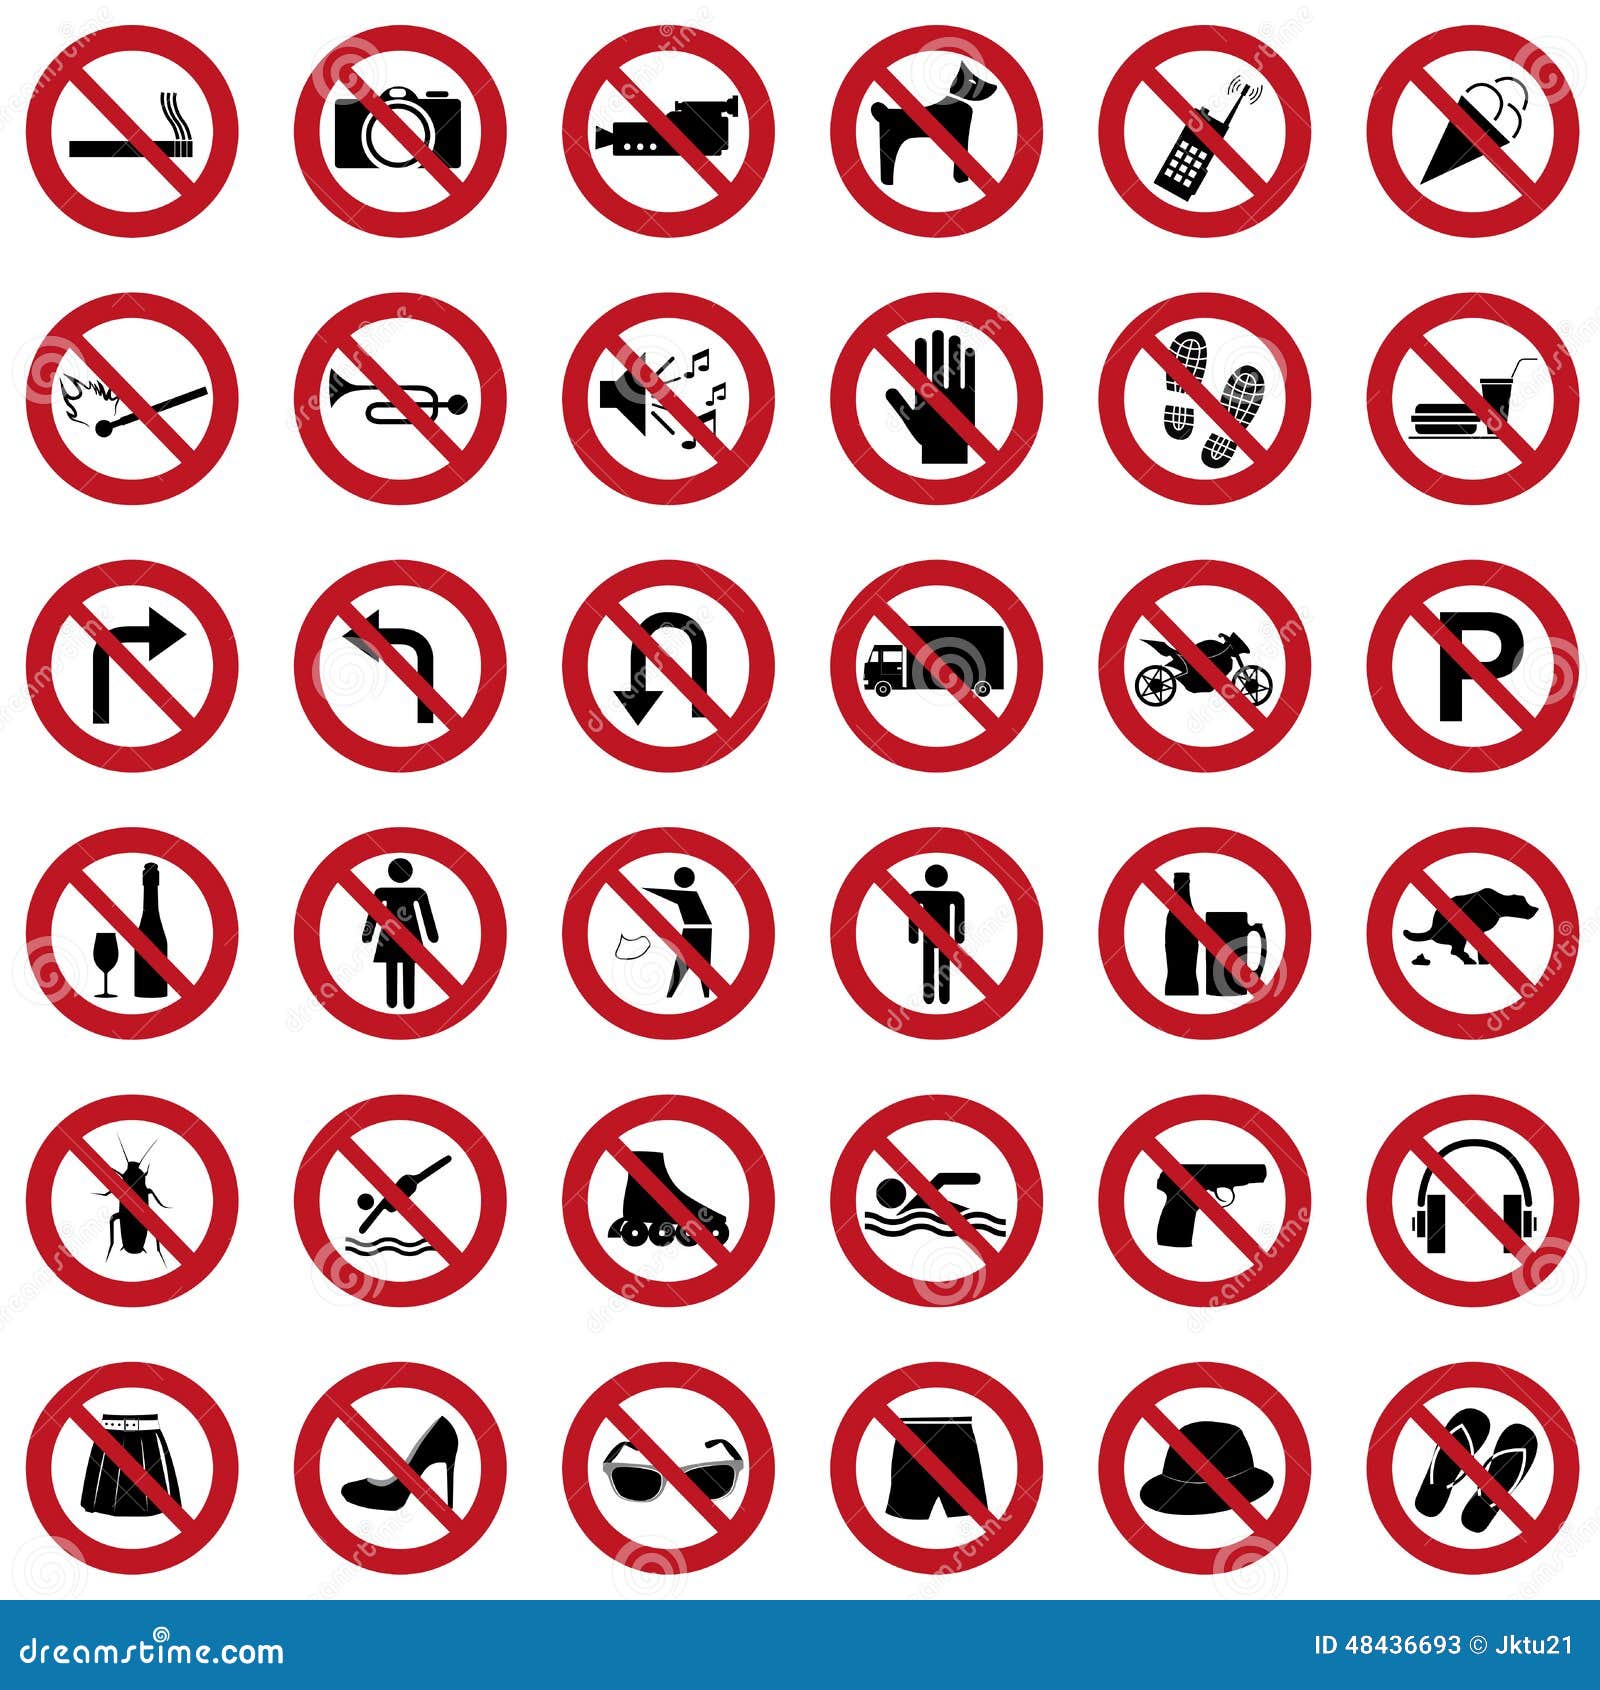 prohibition signs